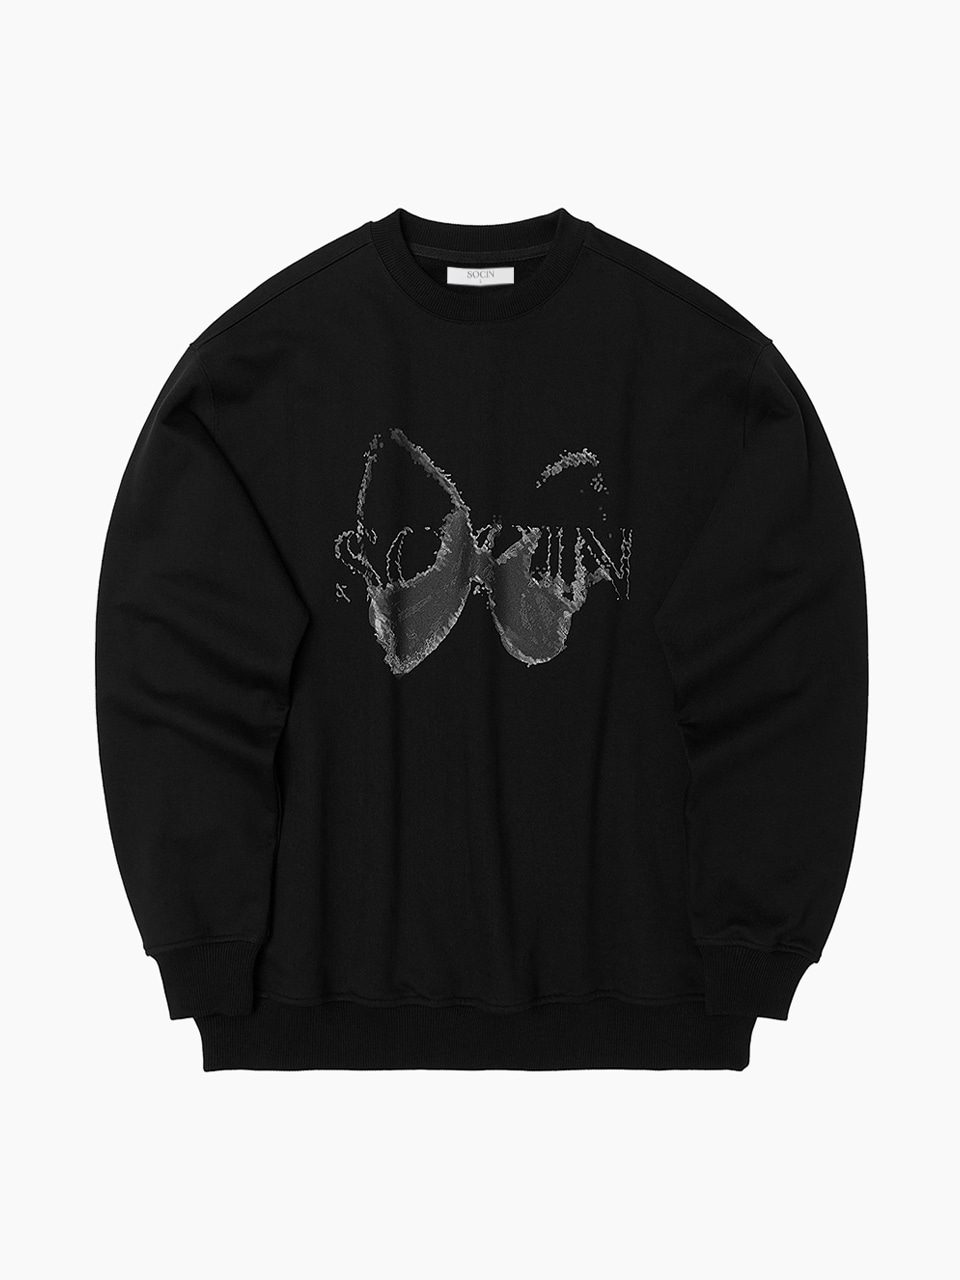 Abstract Butterfly Printed Sweatshirts (Black)